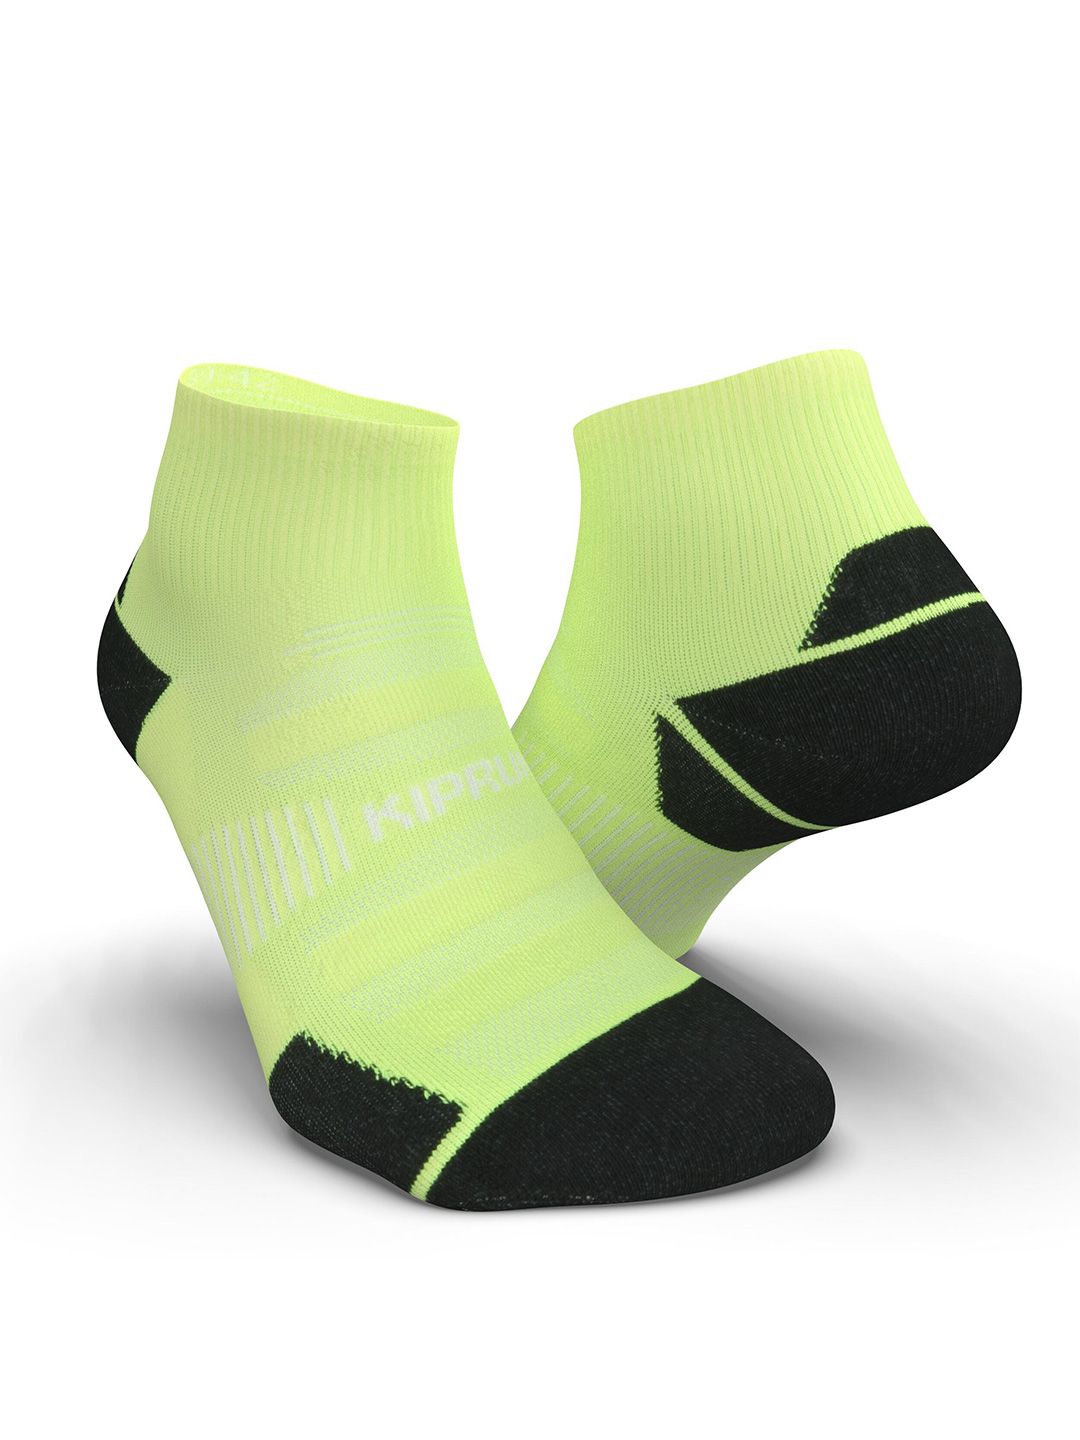 KIPRUN By Decathlon Assorted Thick Running Socks Price in India